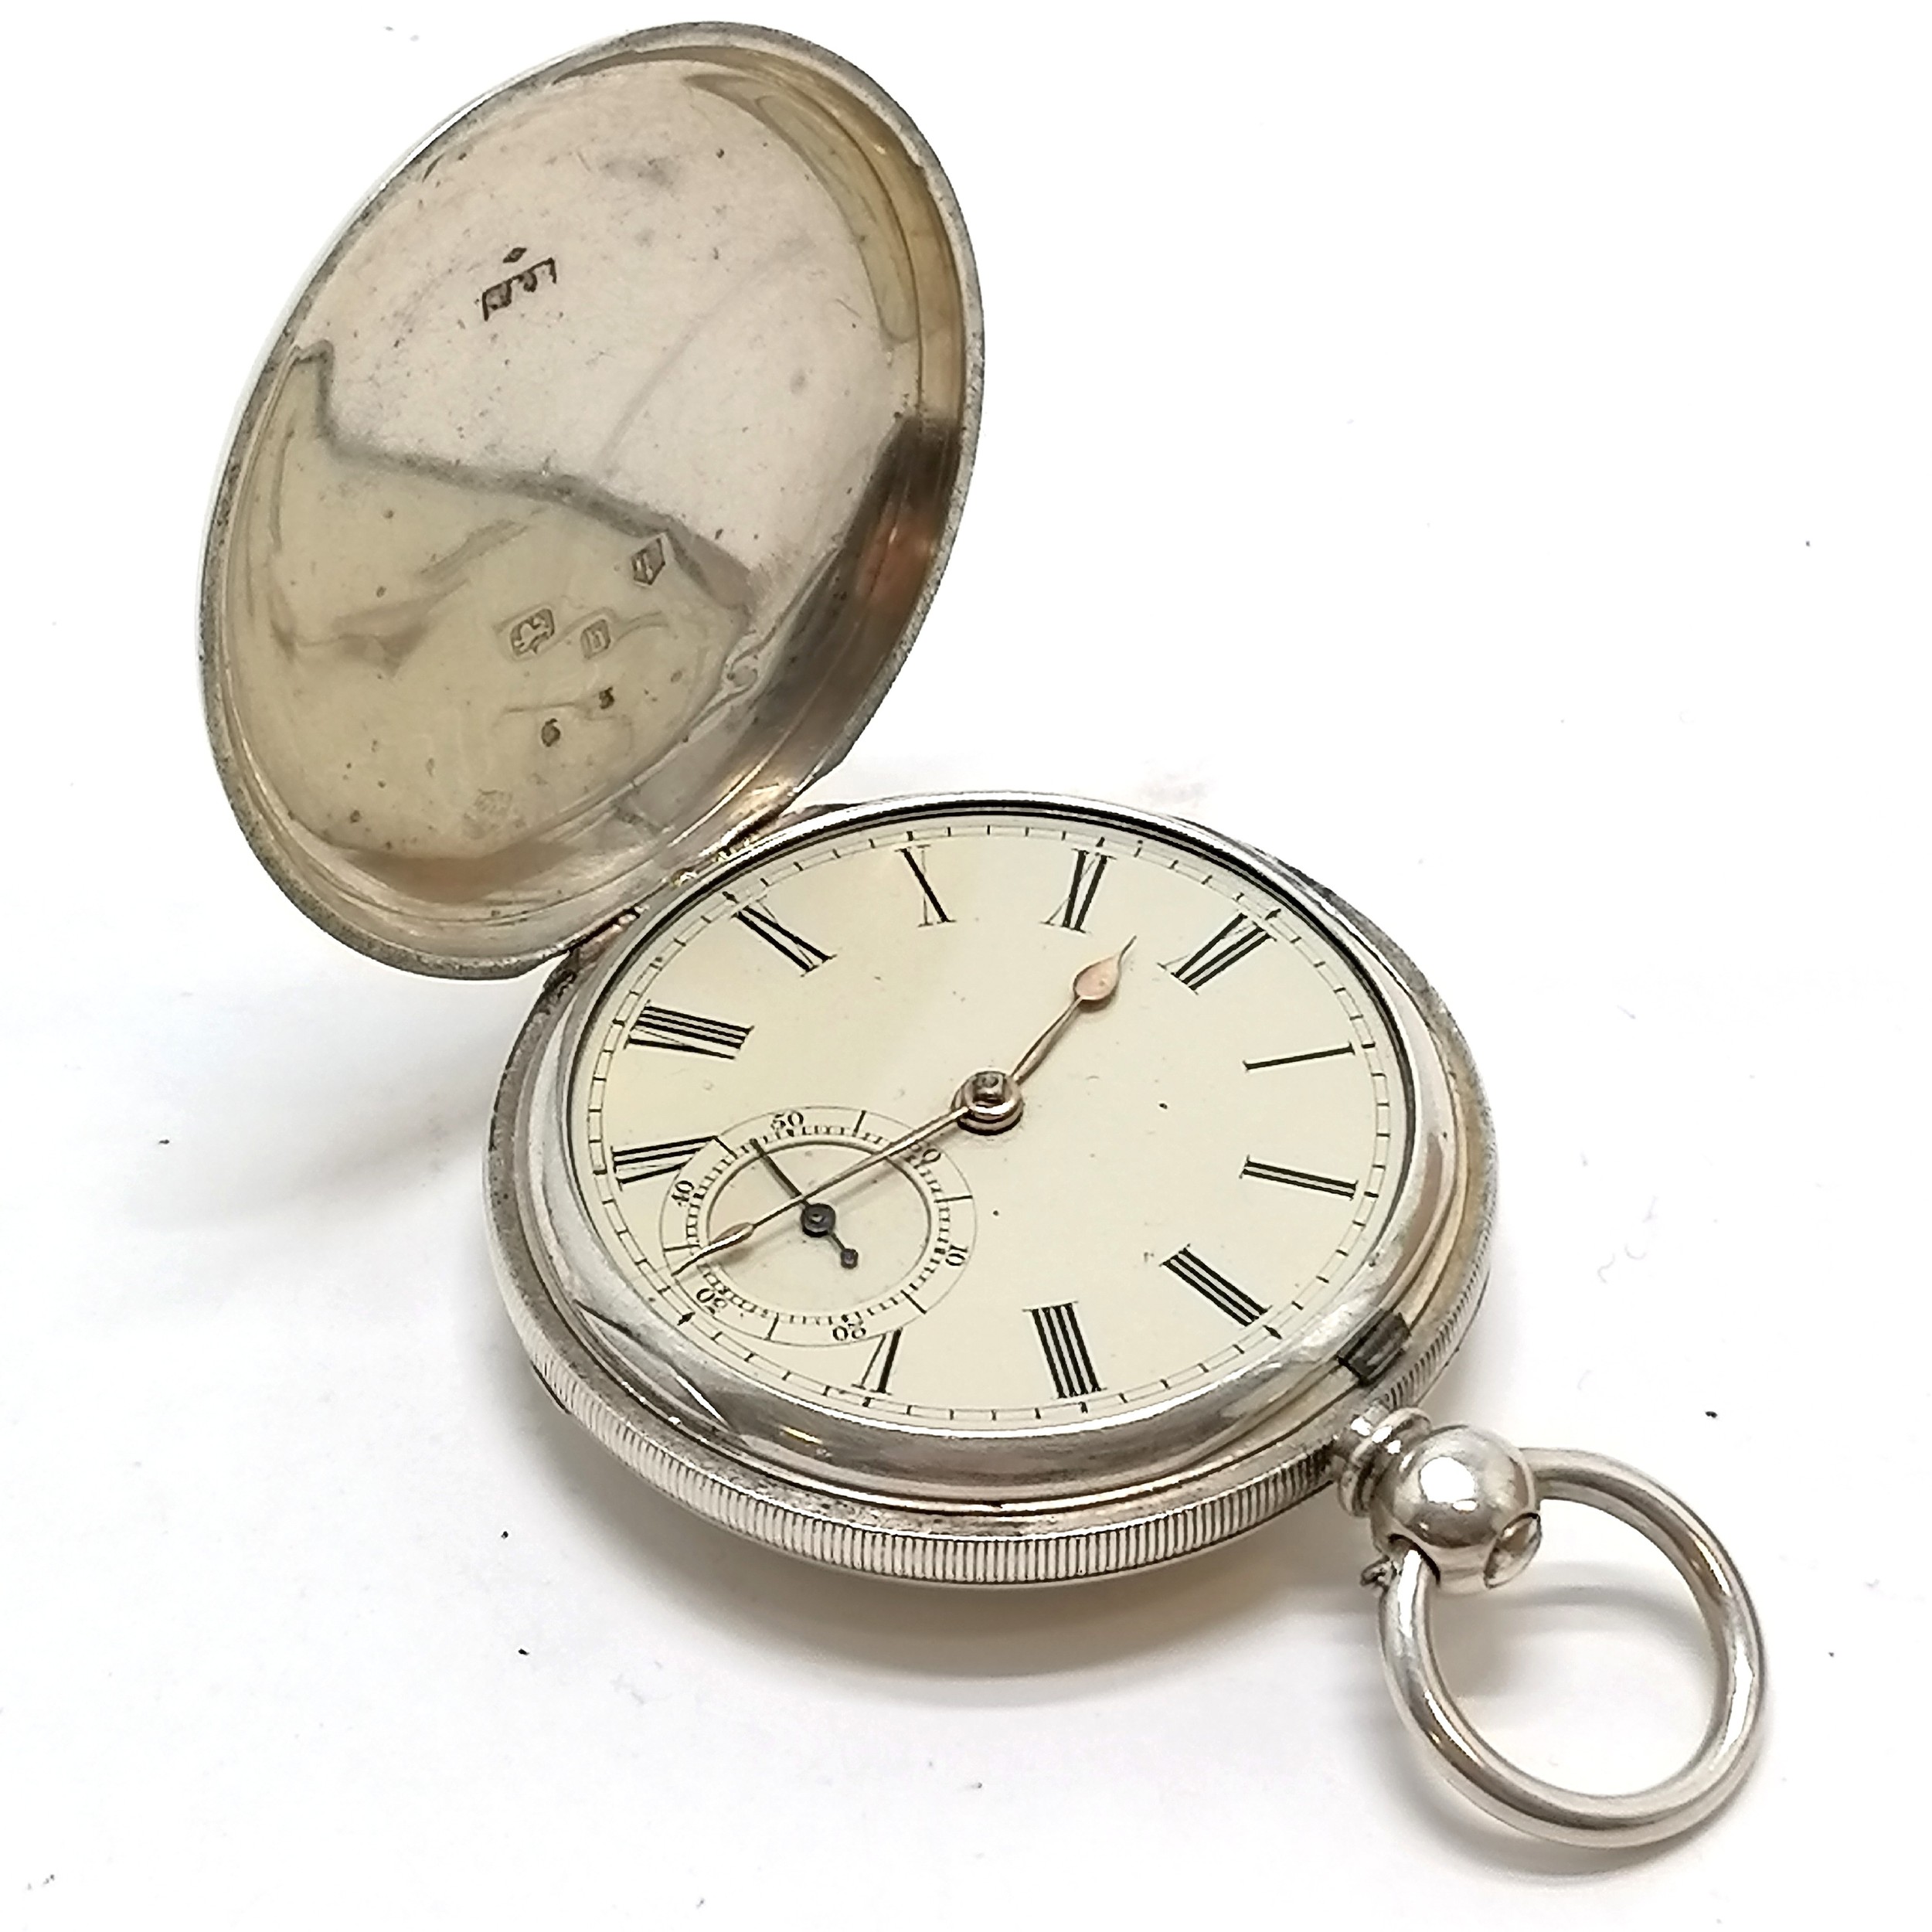 Antique Chester silver hunter pocket watch with Thomas Howard (Liverpool) #5563 movement - lacks